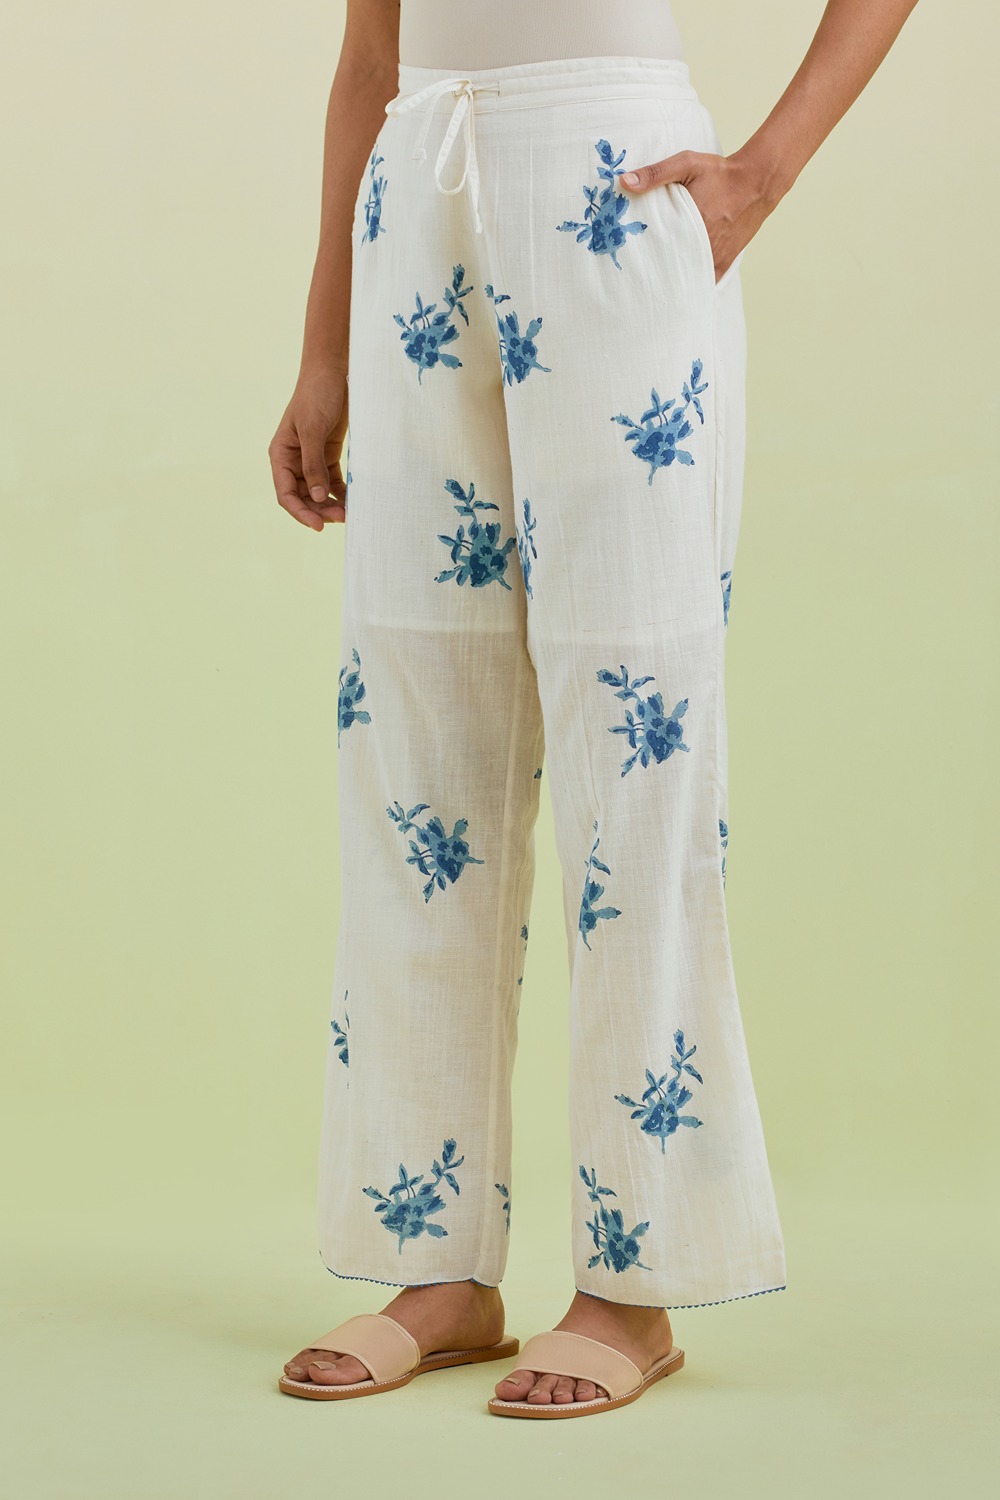 Off White Straight Pants With All-Over Blue Colored Floral Boota Hand-Block Print